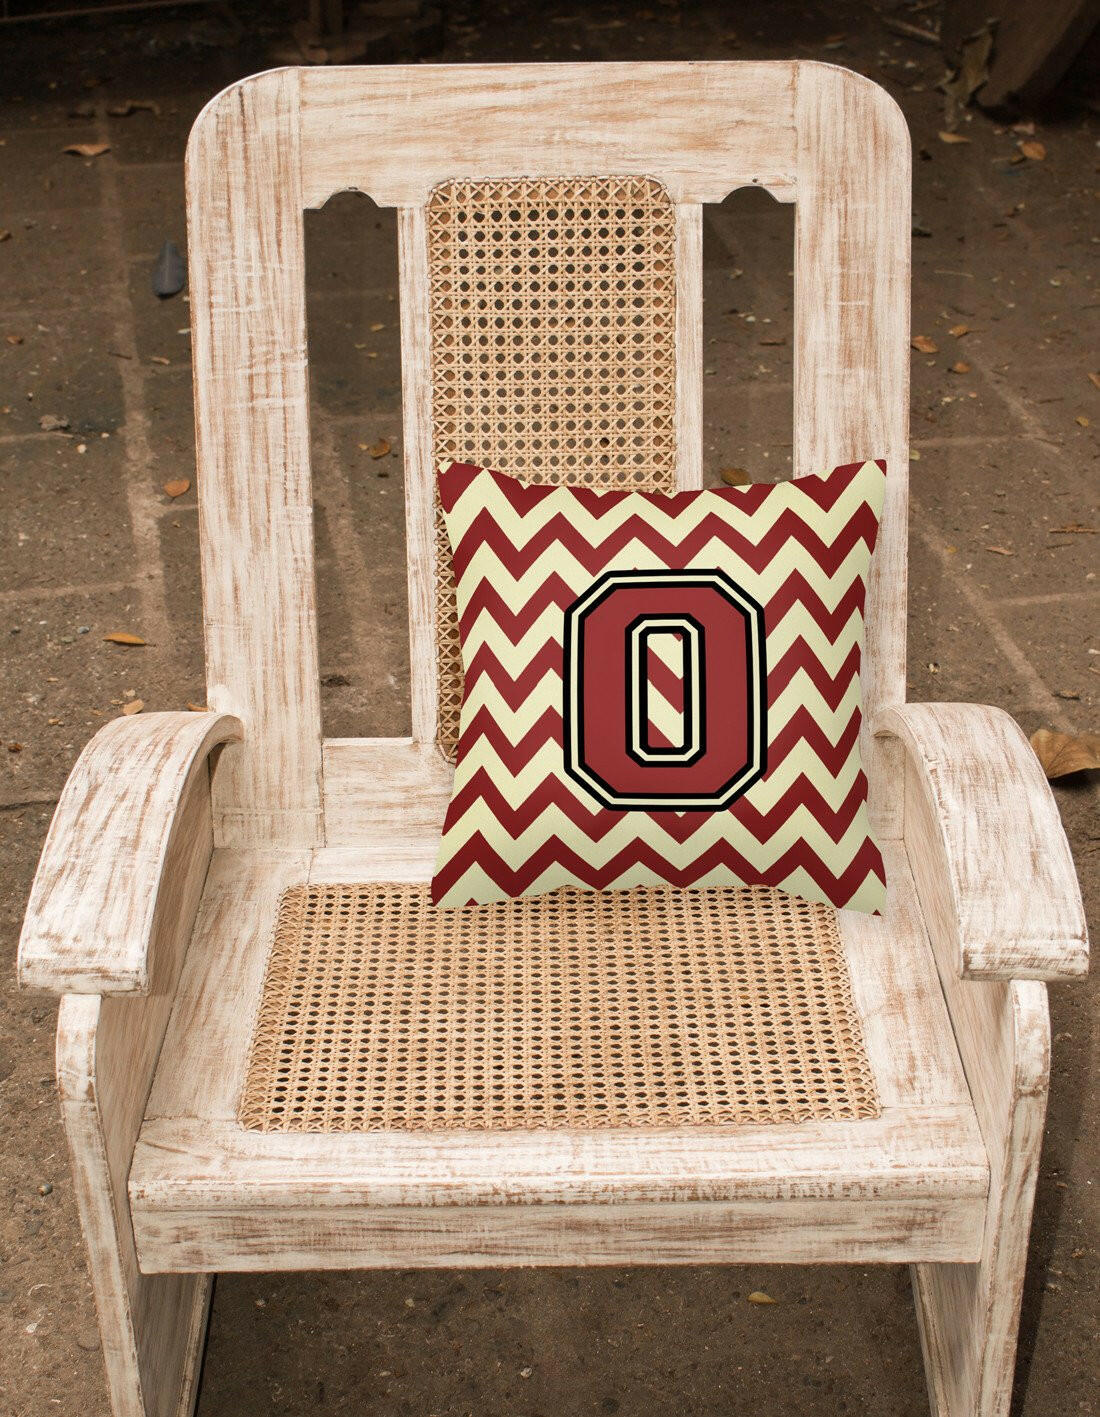 Letter O Chevron Maroon and Gold Fabric Decorative Pillow CJ1061-OPW1414 by Caroline's Treasures